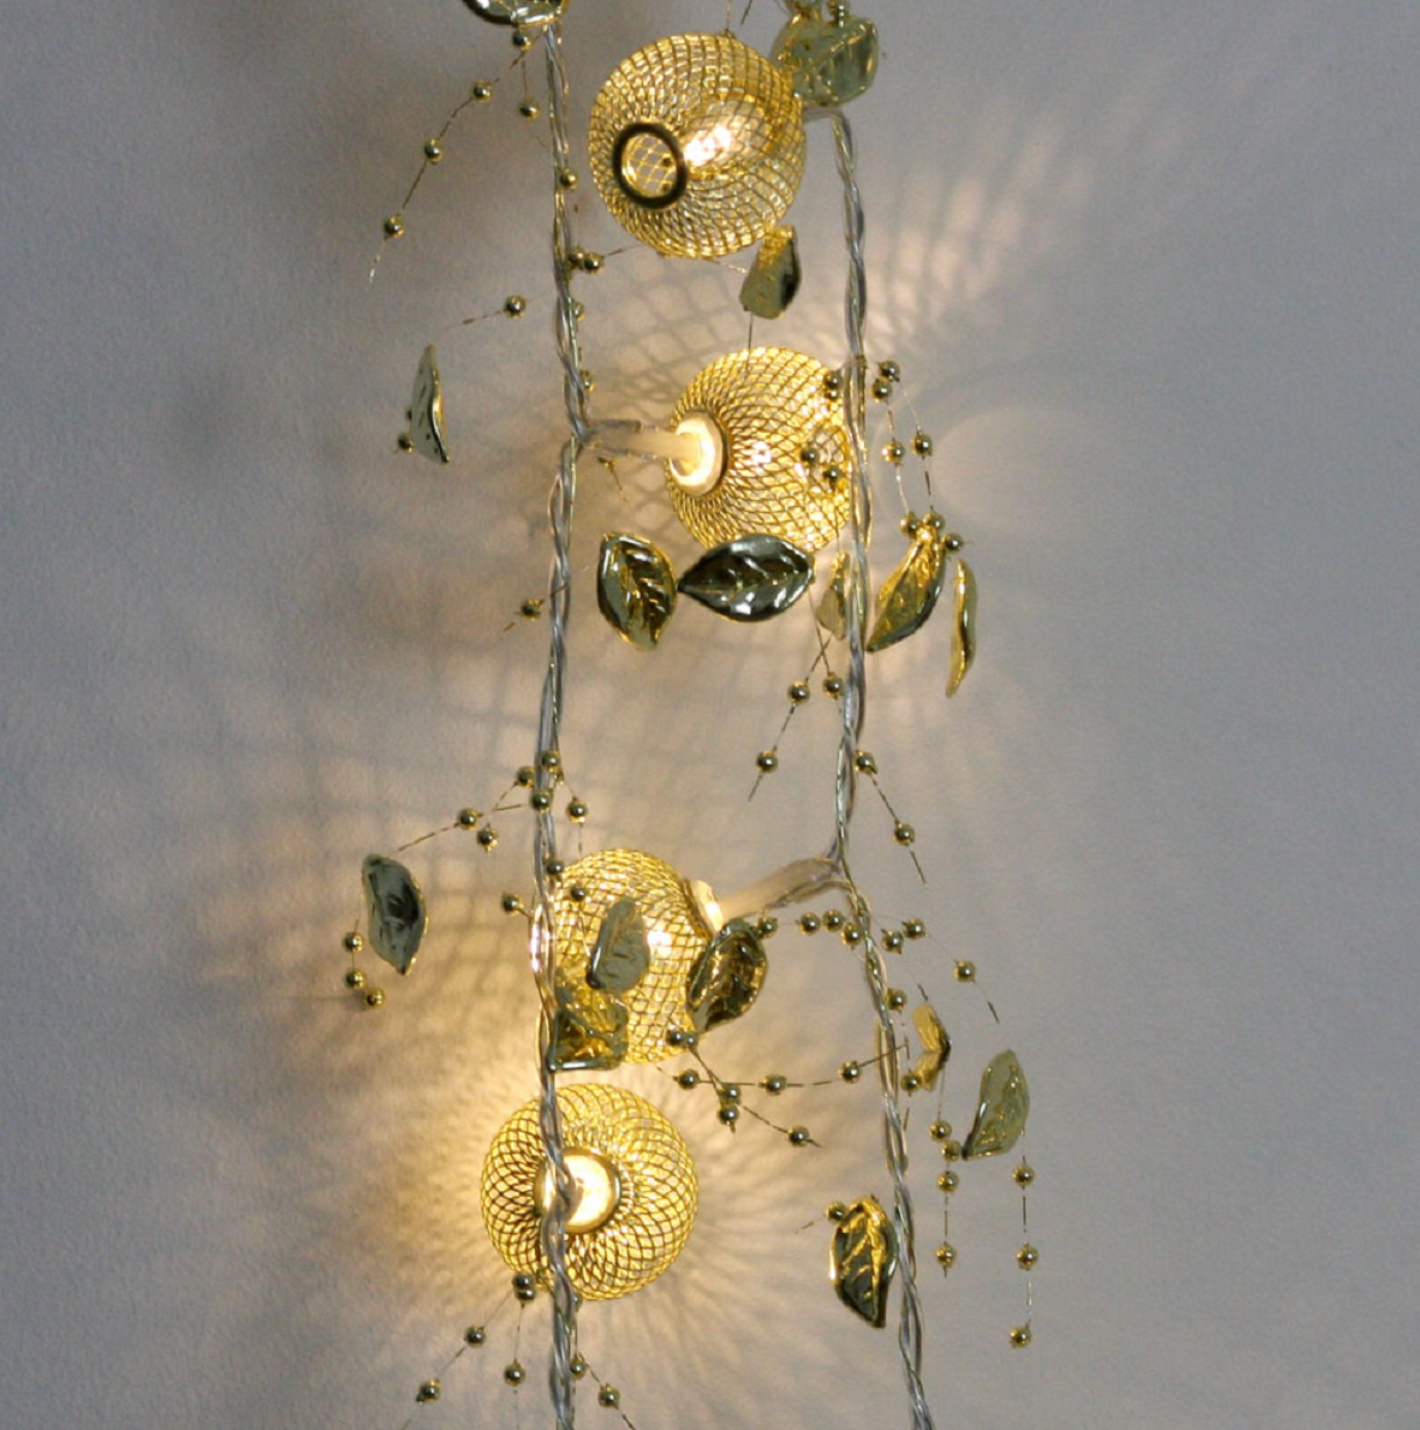 Ora Fairy Lights ( Battery Operated)